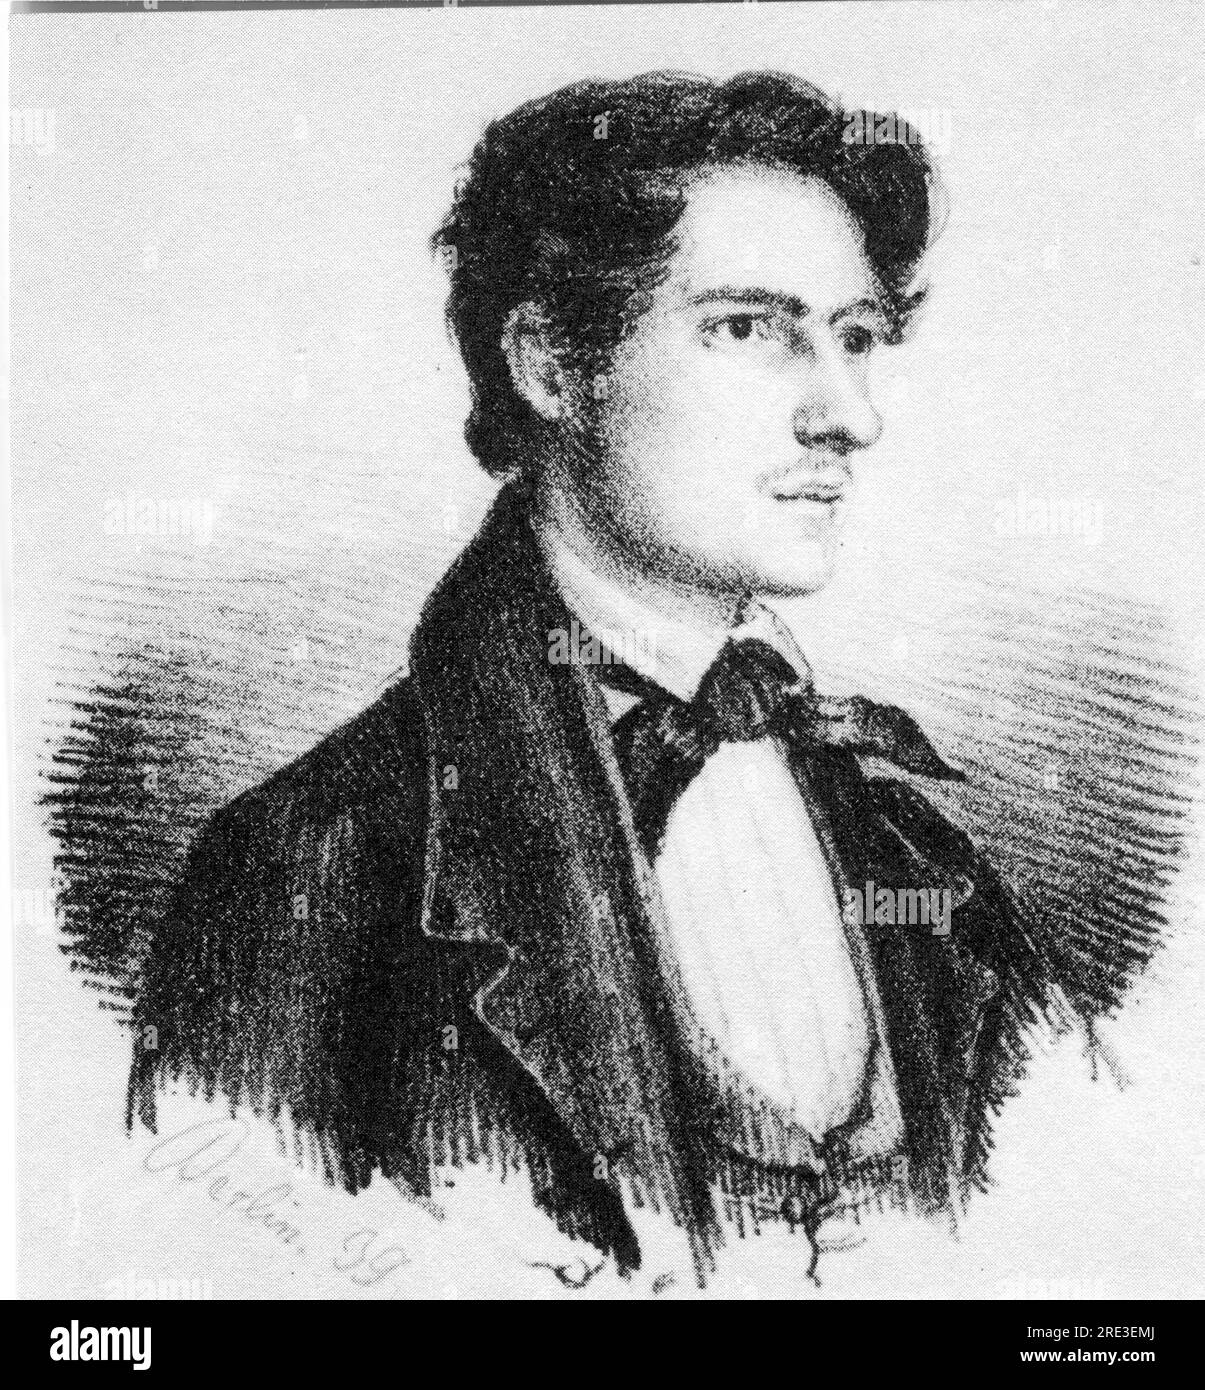 Westphalen, Edgar von, 26.3.1819 - 30.9.1890, German politician, print after wood engraving, circa 1845, ARTIST'S COPYRIGHT HAS NOT TO BE CLEARED Stock Photo